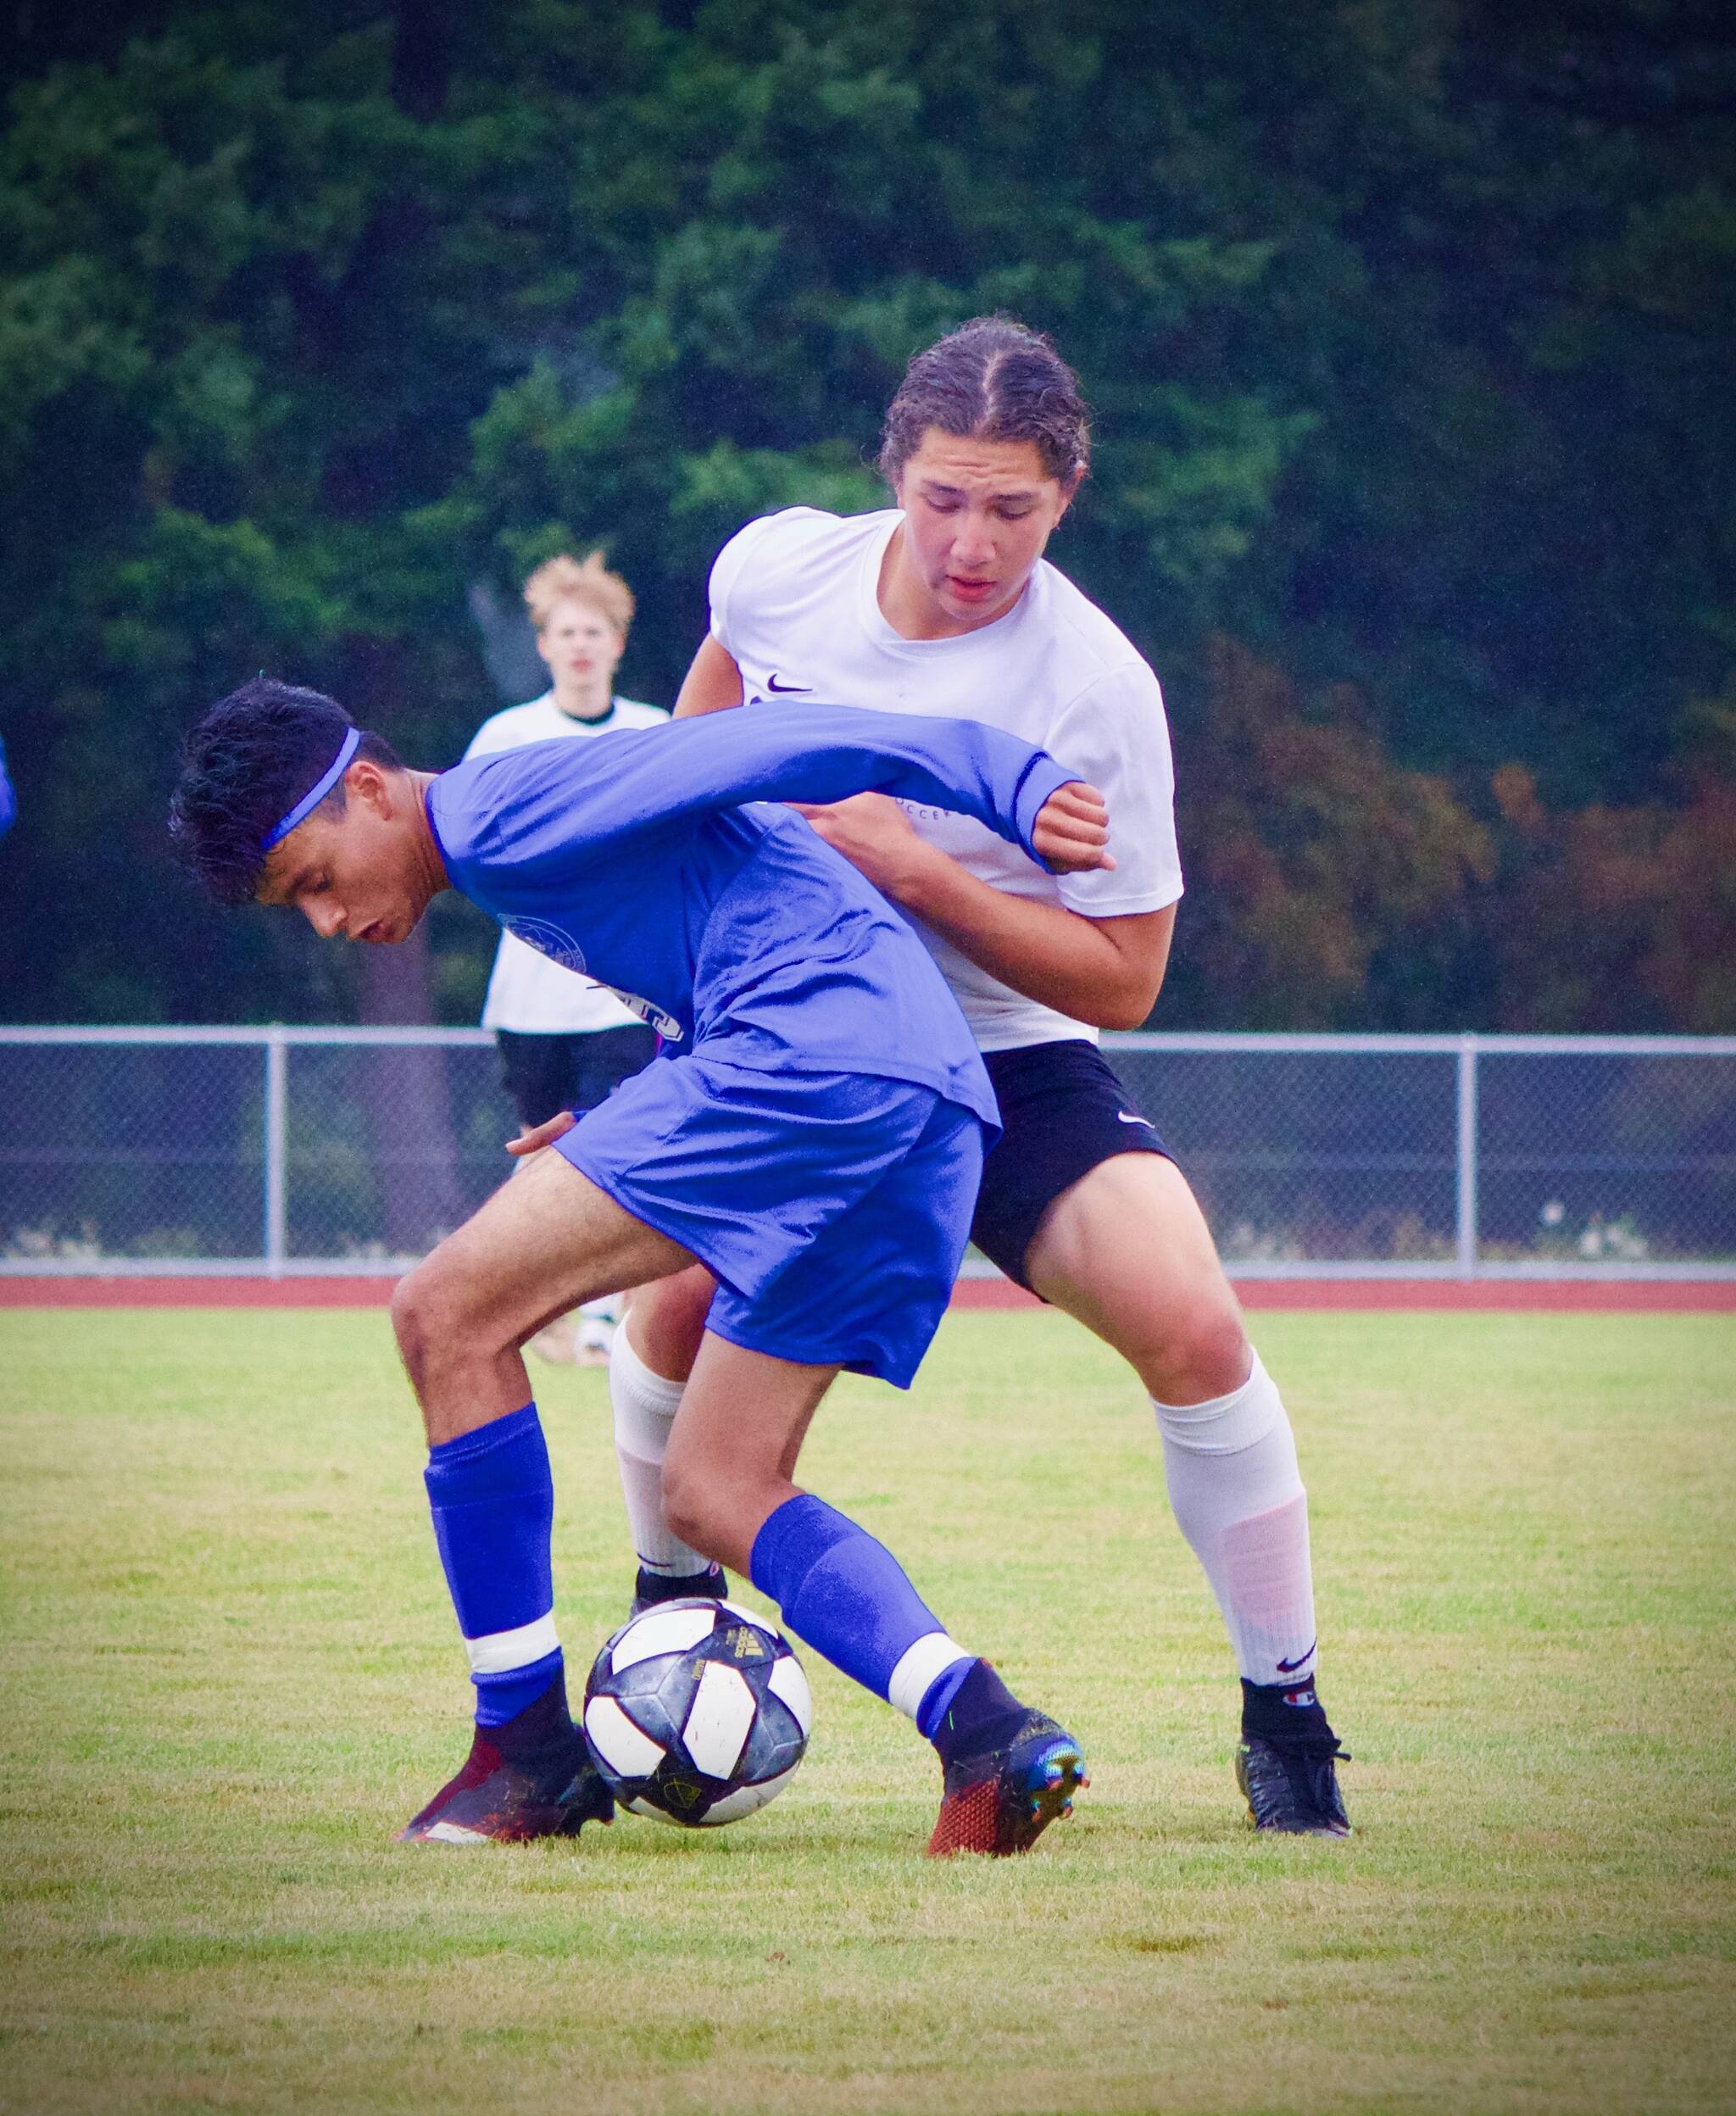 Corey Wiscomb photo
Whoever said soccer isn’t a physical game probably hasn’t played in an Orcas vs. Friday Harbor match! Here Pedro Banderas uses dominant position to shield the ball from a larger FH player before passing off to an open teammate.